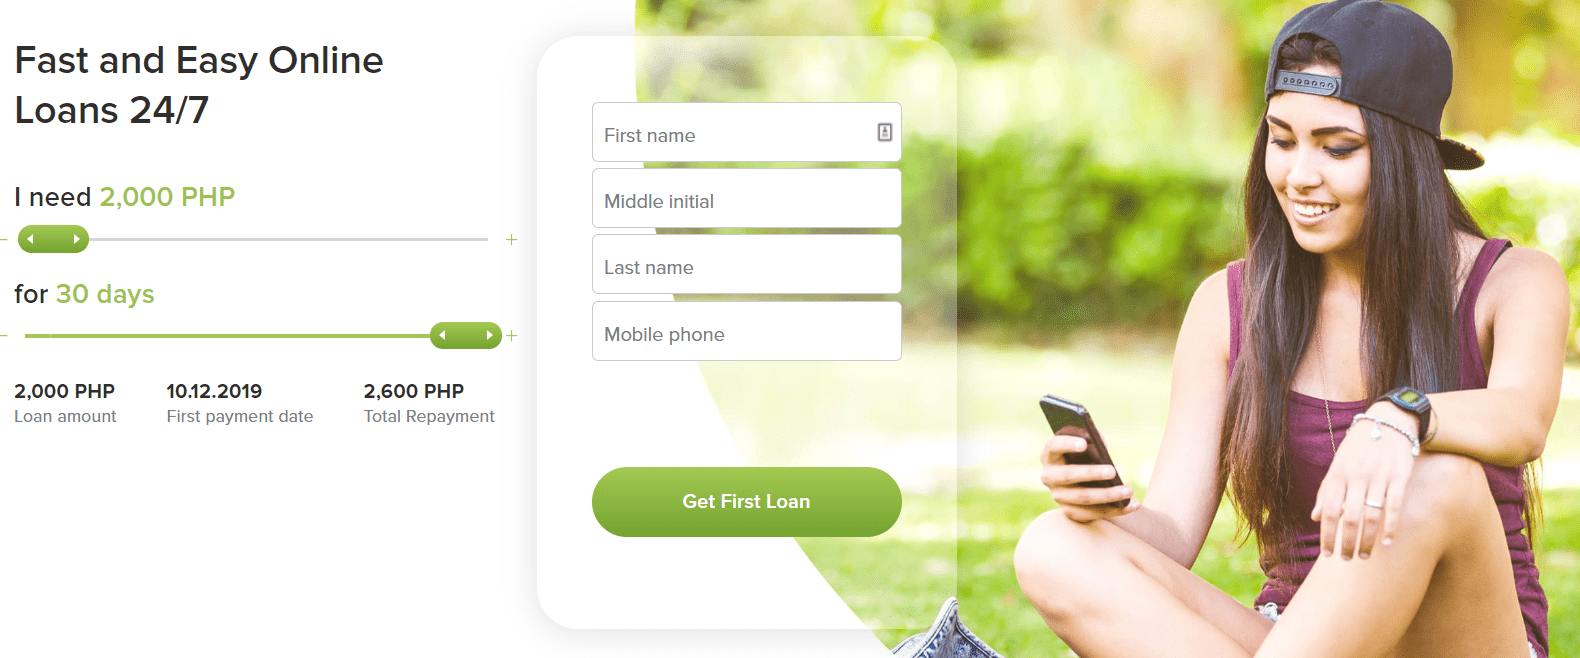 Online Loans Pilipinas Review: Pros, Cons, Application Process, and User Feedback